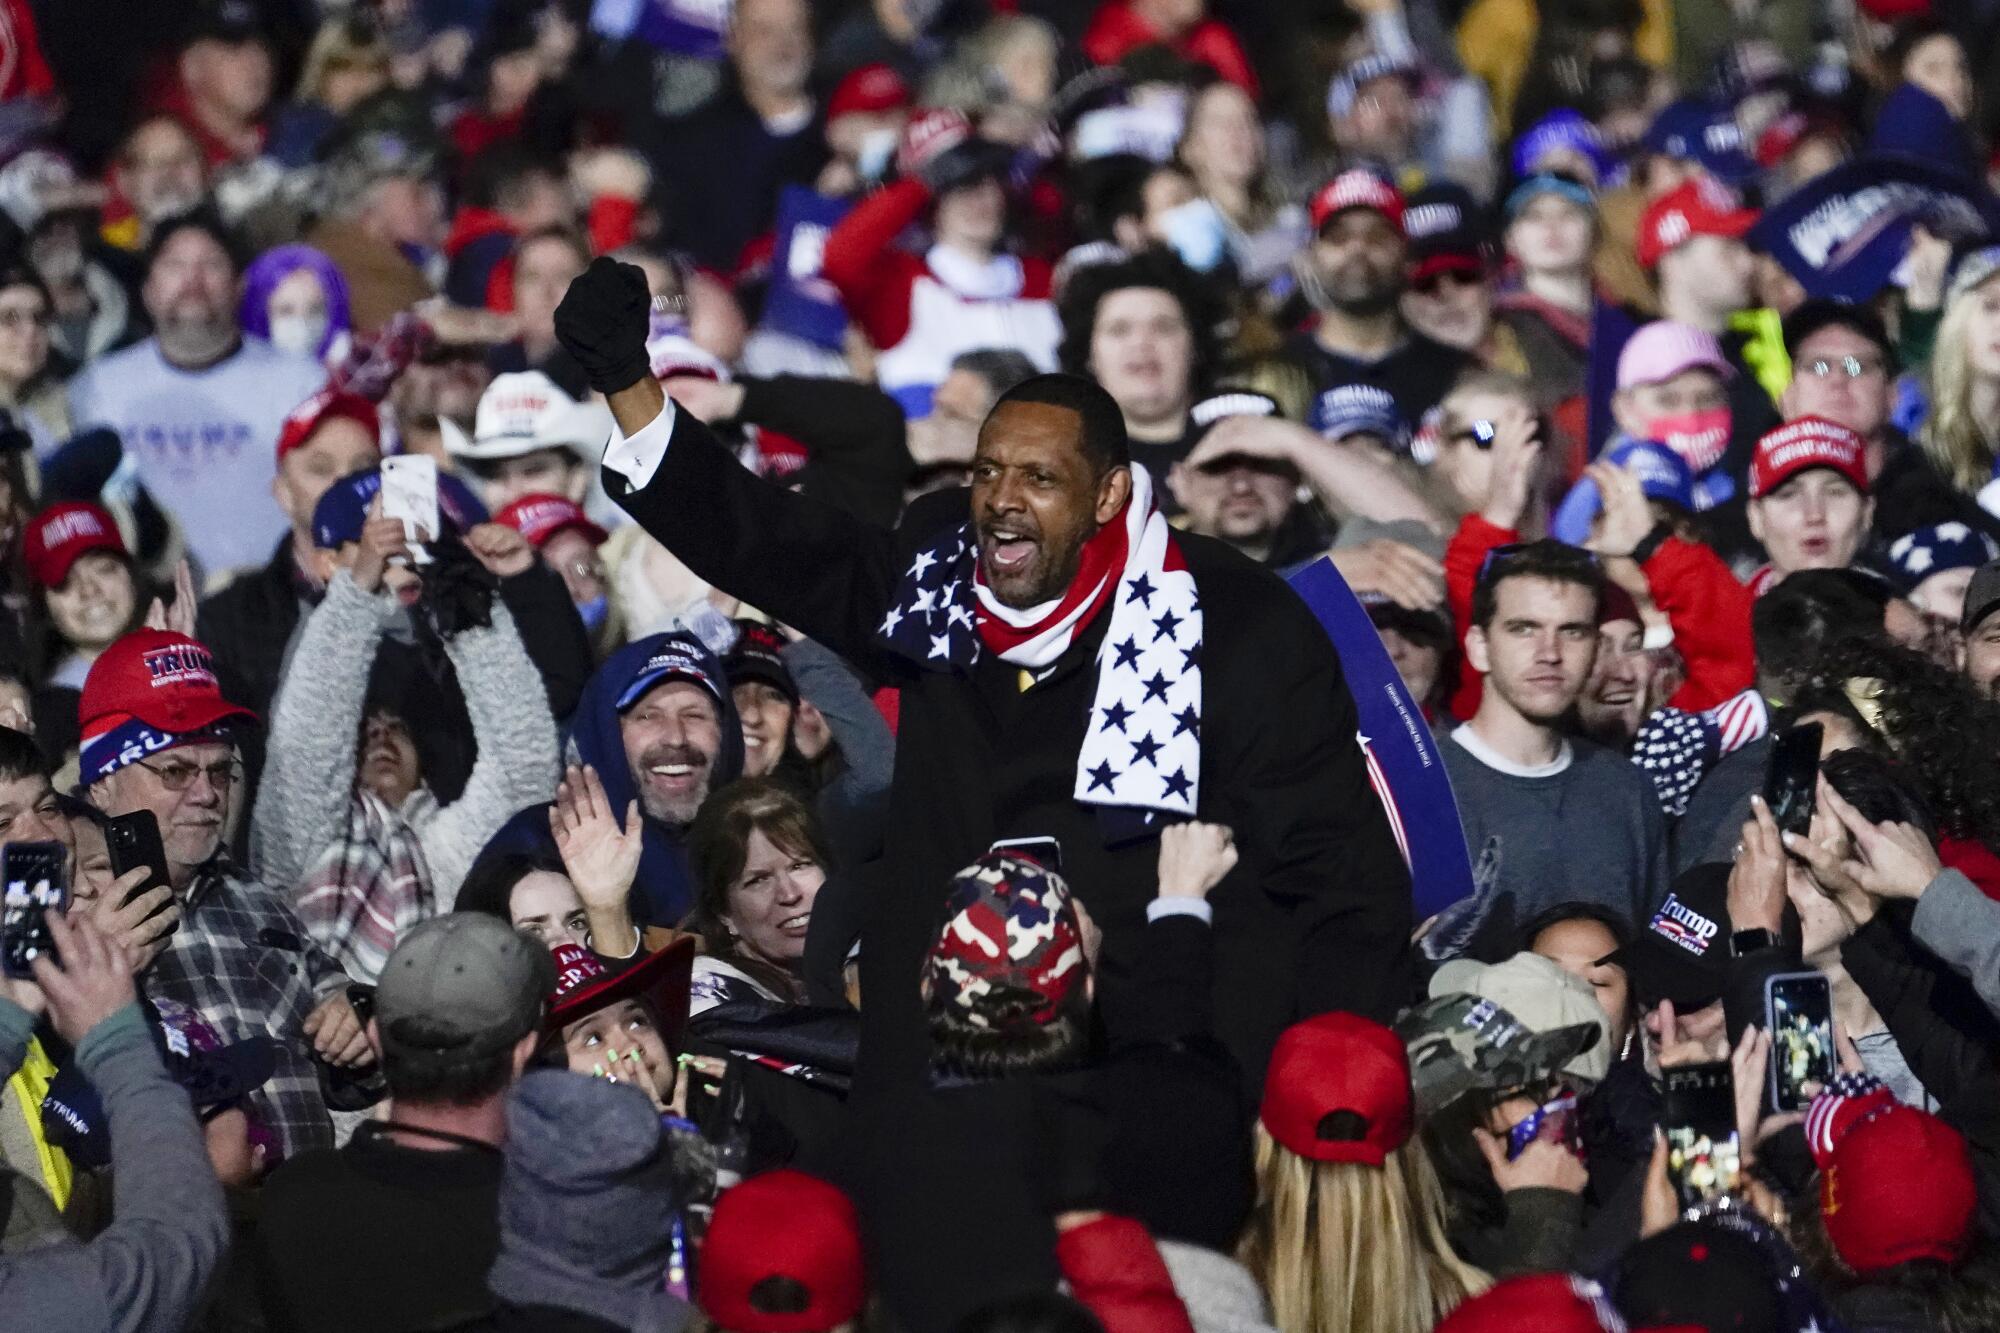 Amid a crowd of people in red hats, a man in a winter scarf with a U.S. flag motif speaks.